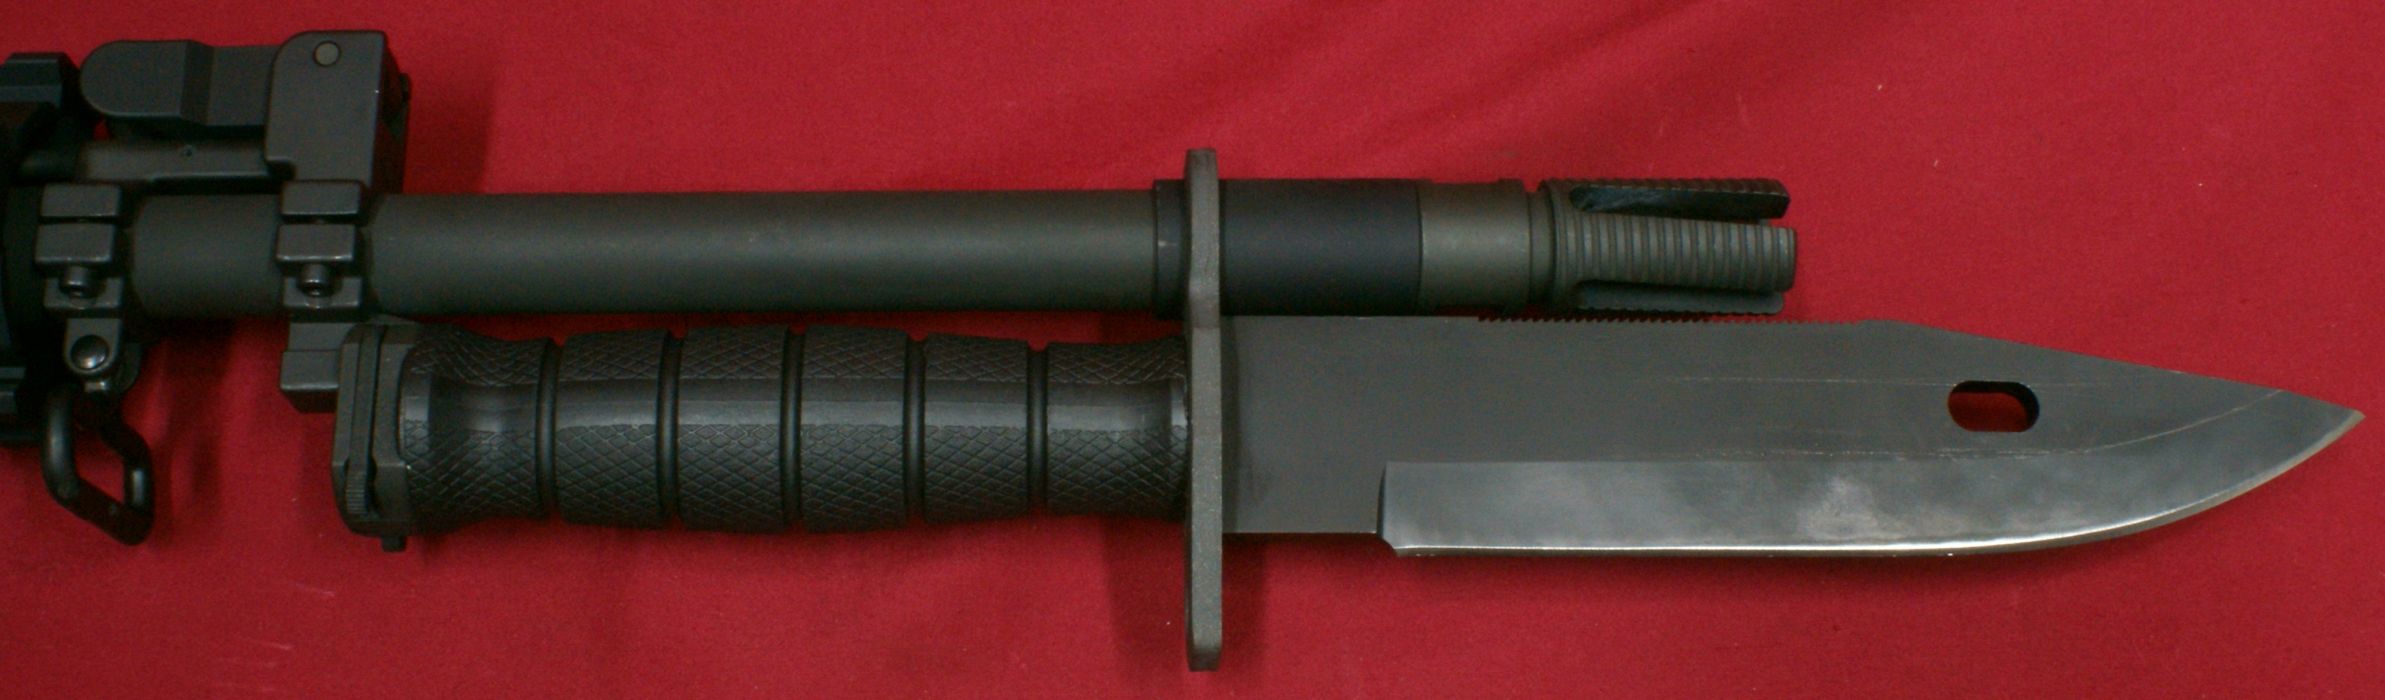 Figure 11 - Tacticool22 Bayonet Adapter Solved The Issue.